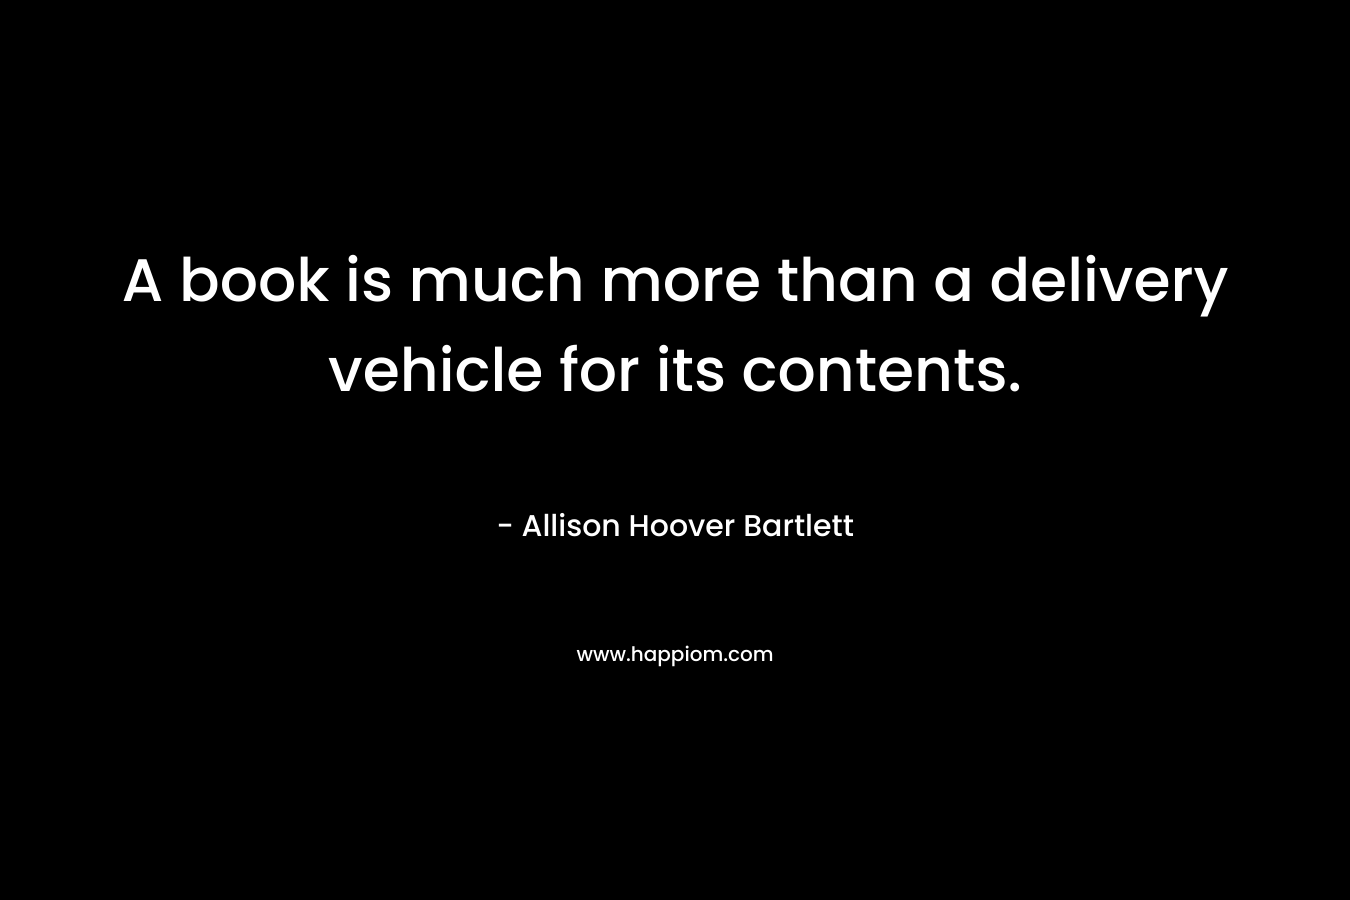 A book is much more than a delivery vehicle for its contents.